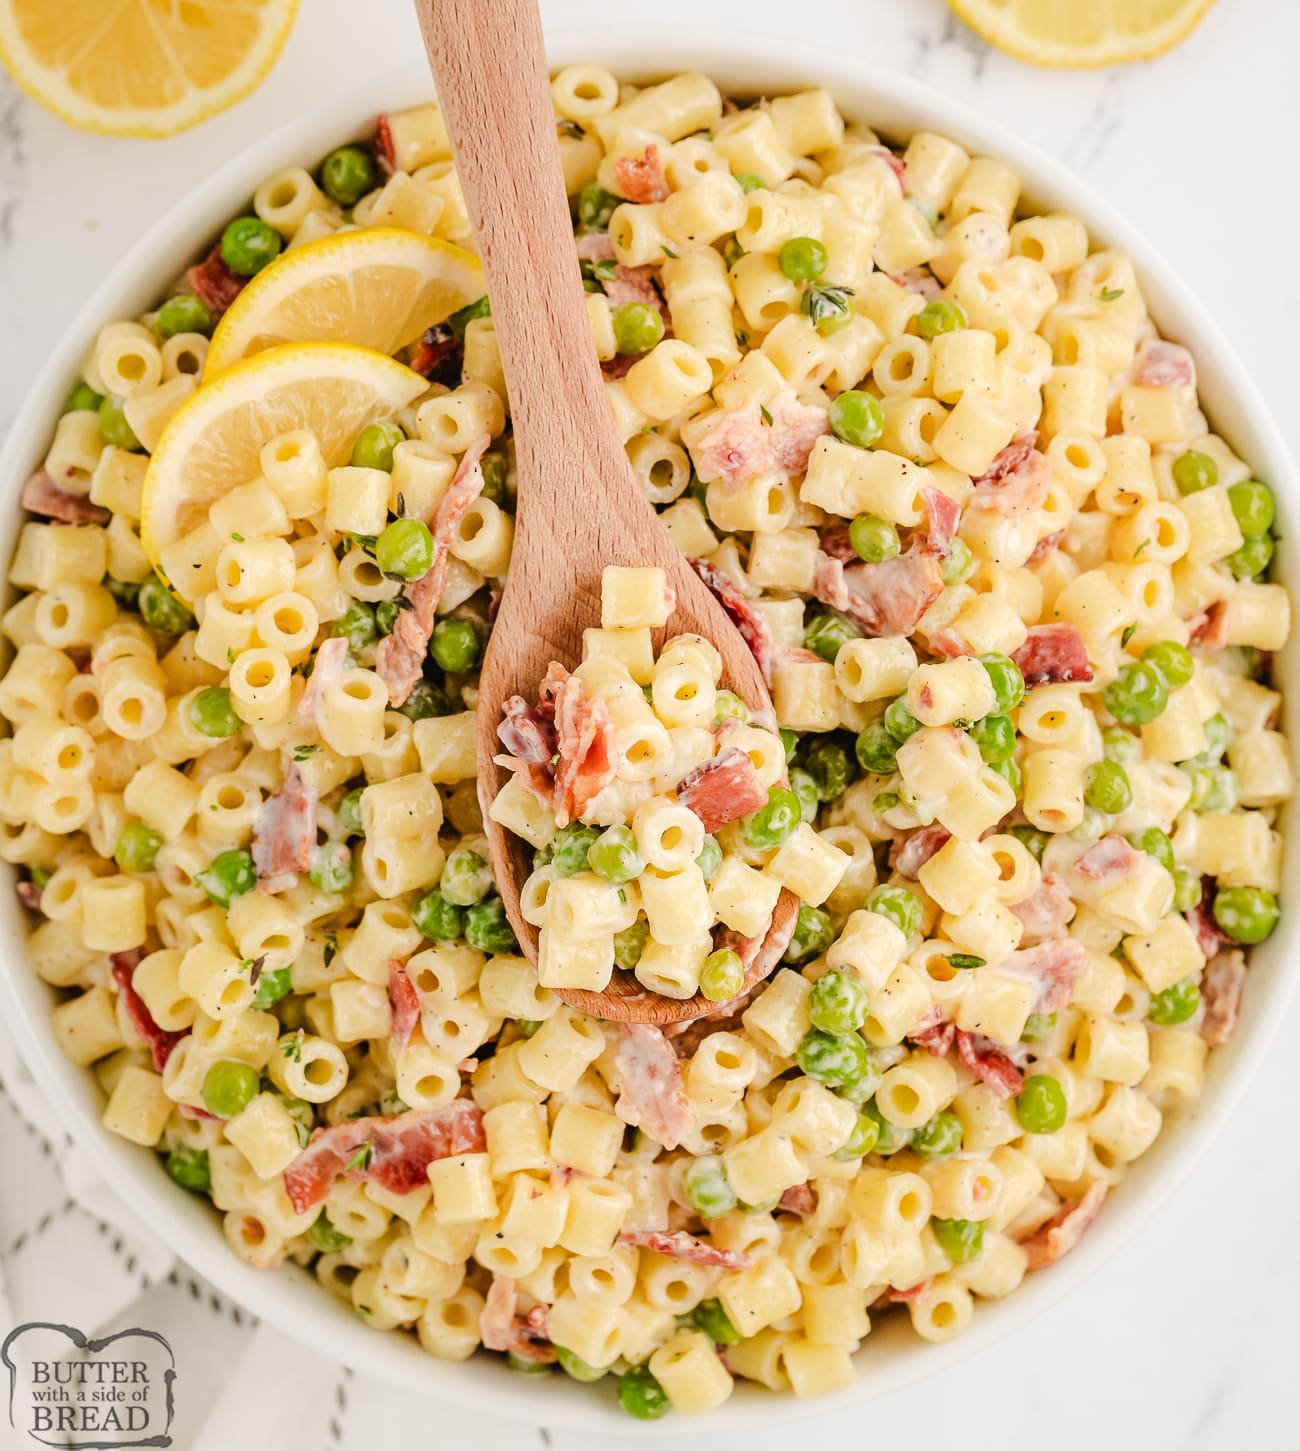 creamy bacon pasta salad in a white bowl with a wooden spoon